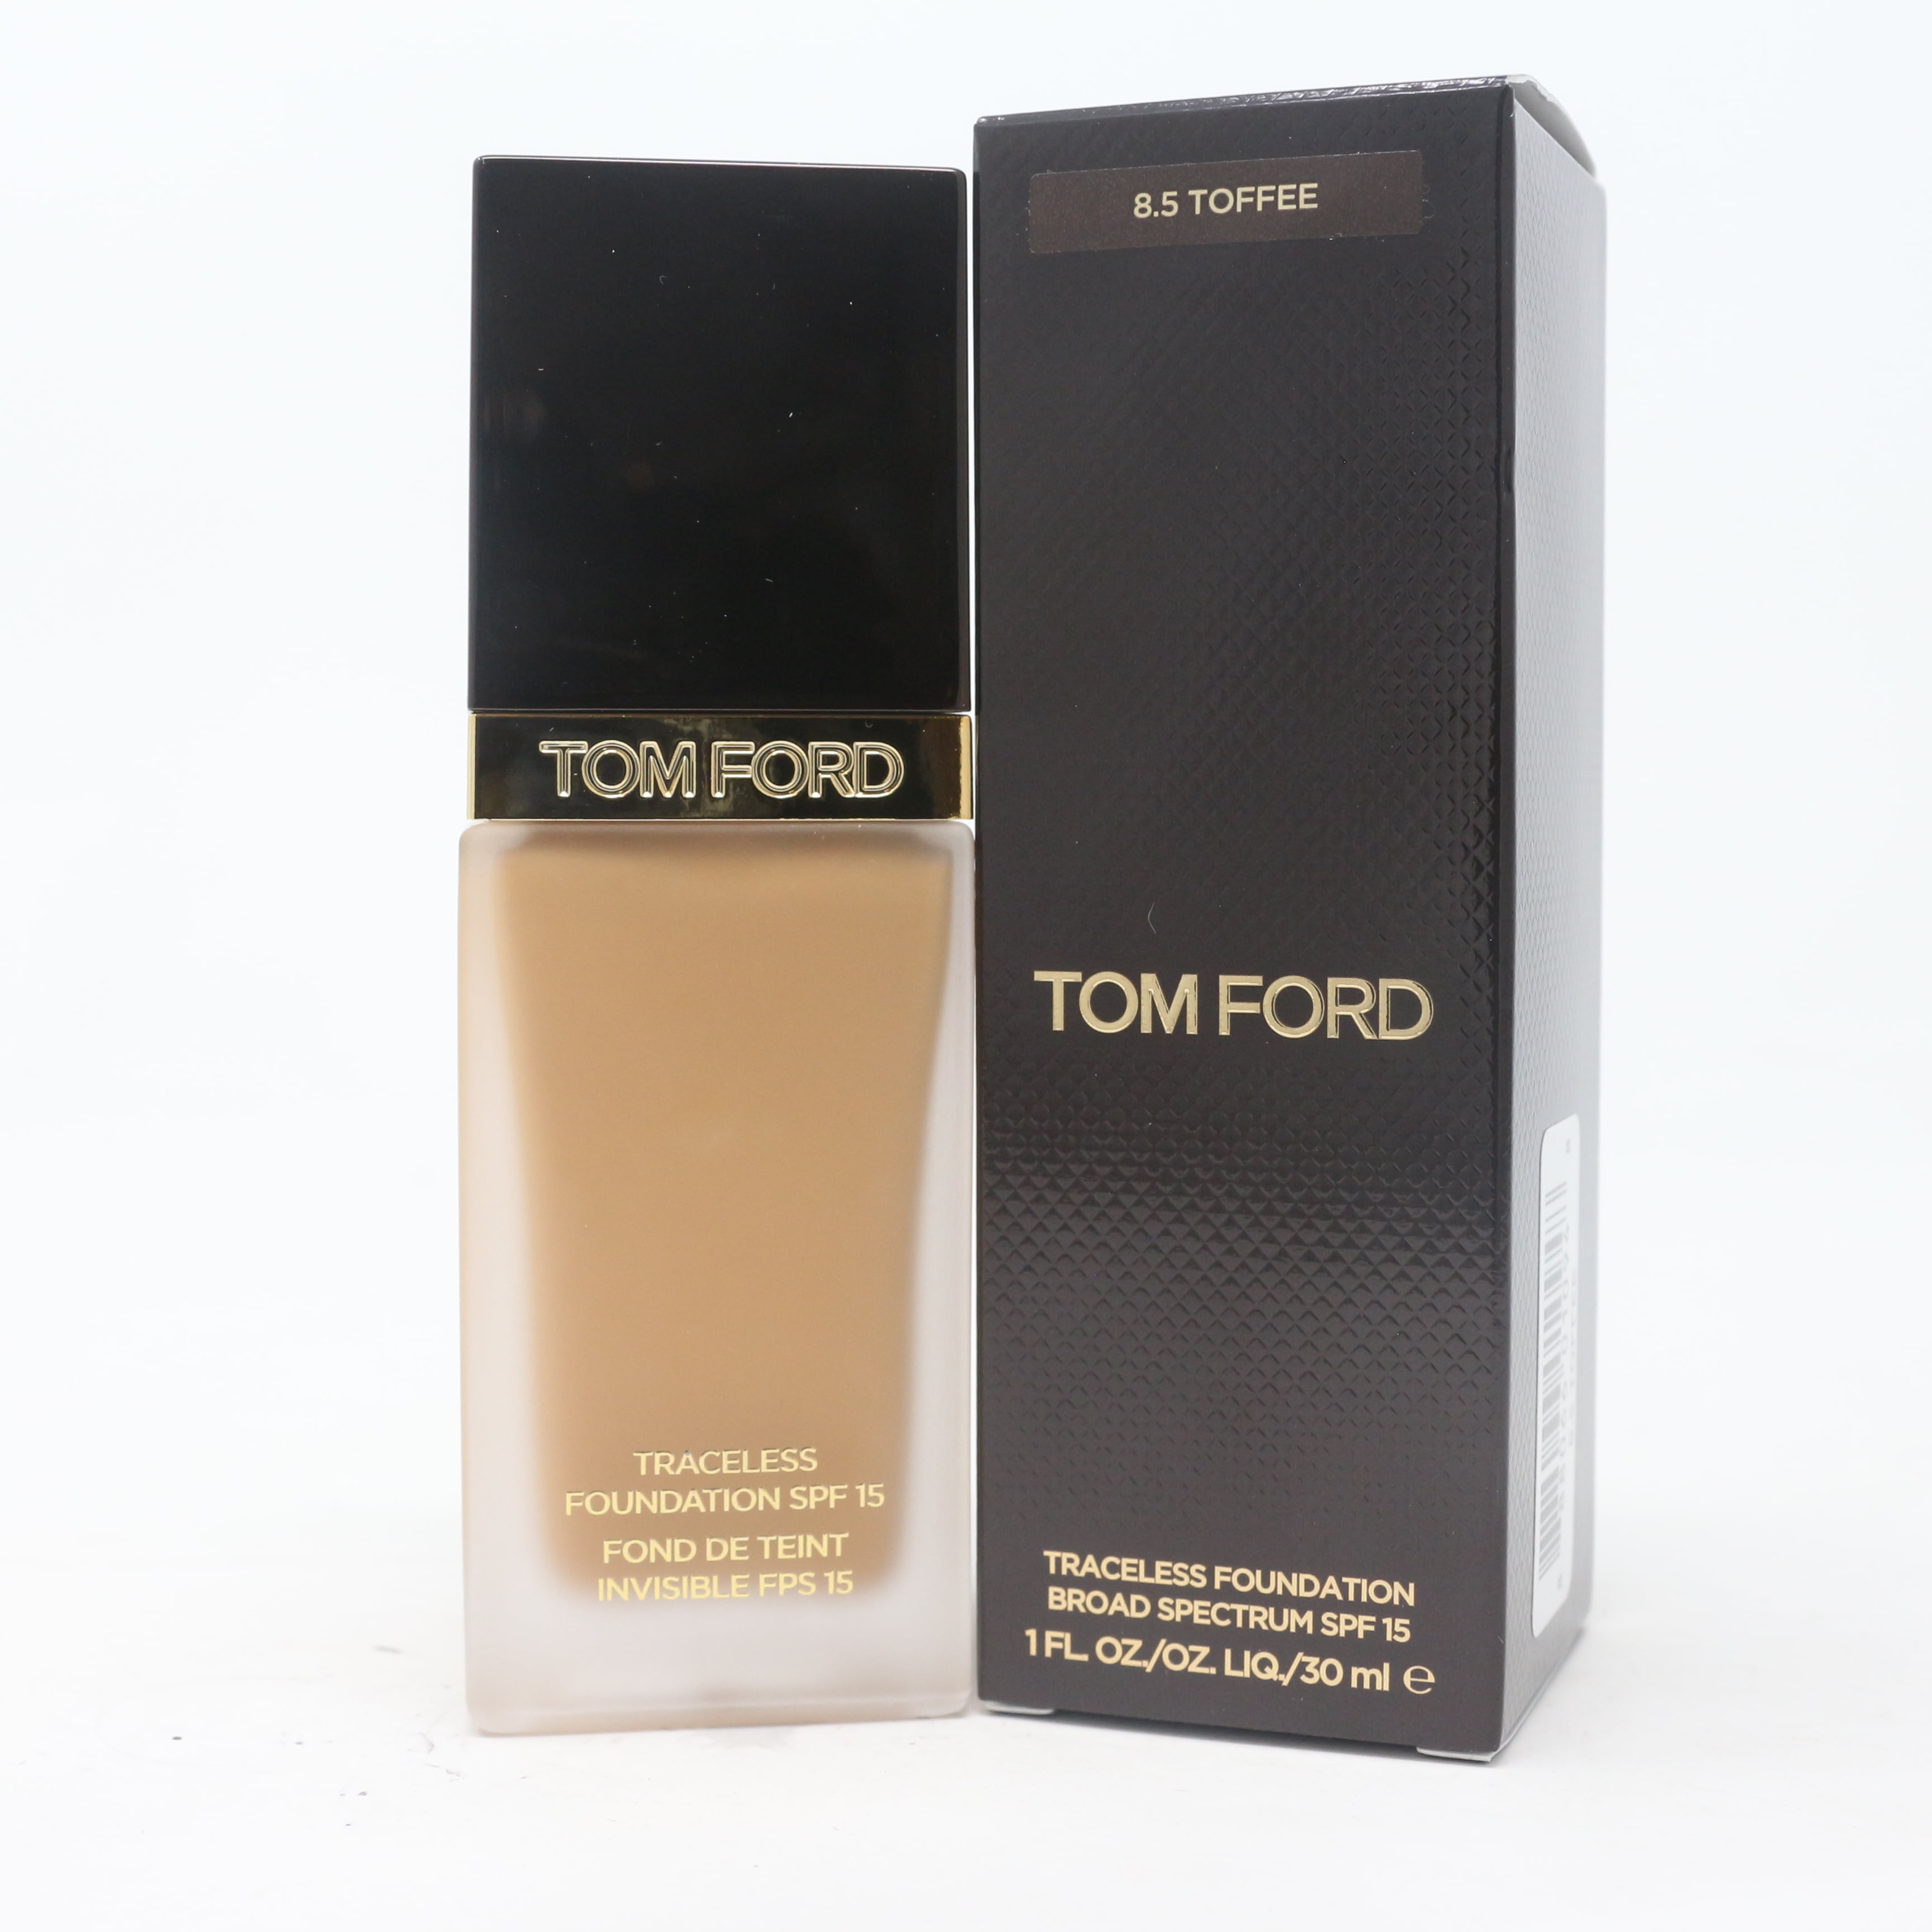 Tom Ford Foundation: Browse 100+ Products up to −50%